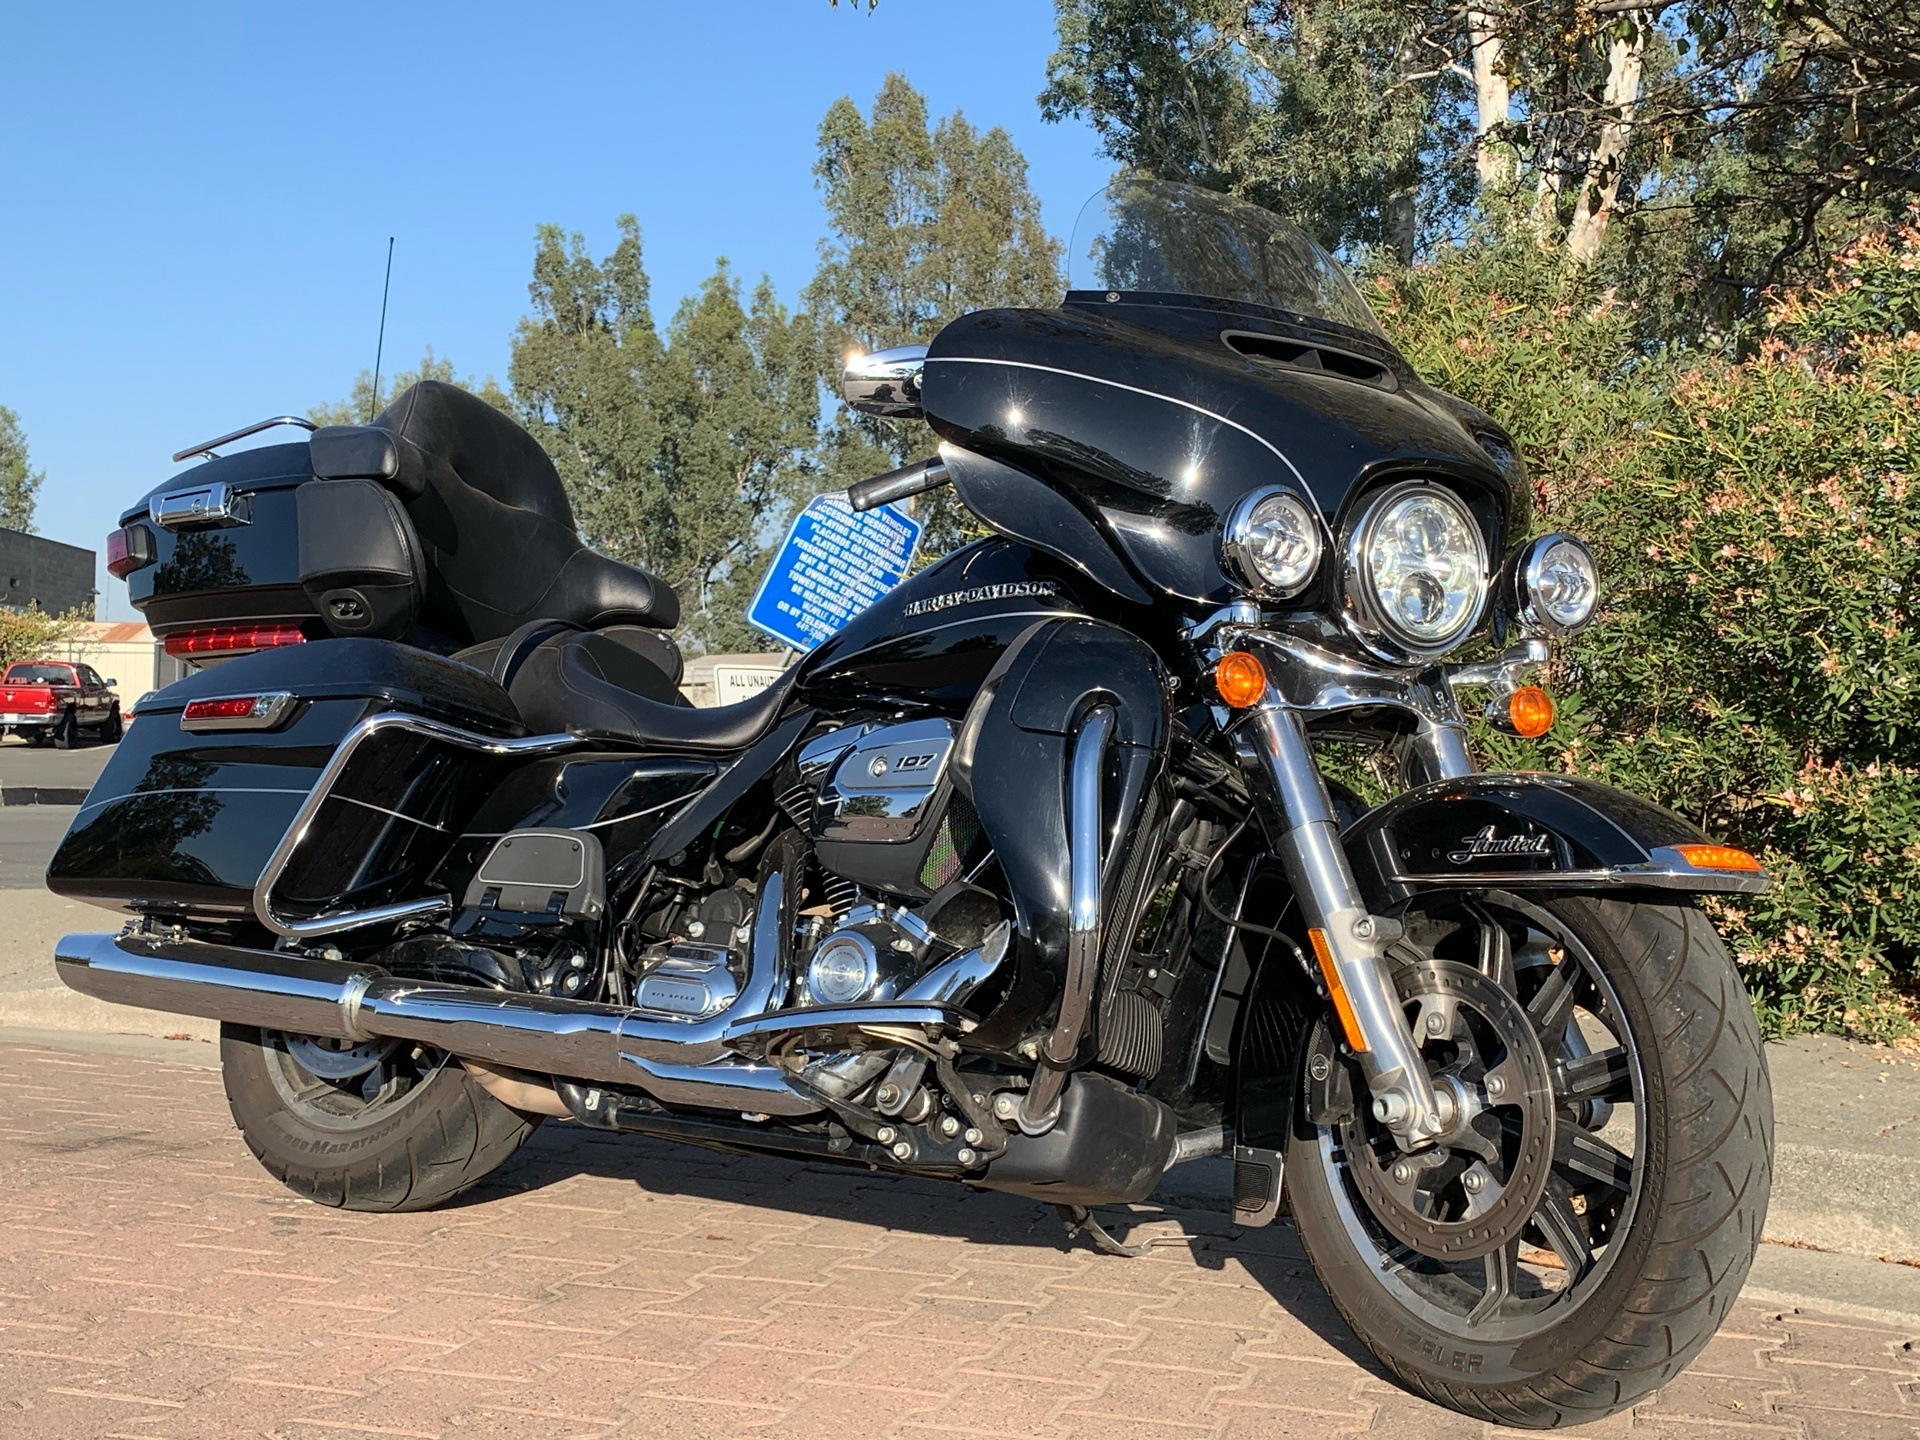 Used 2017 Harley-Davidson Ultra Limited | Motorcycles in Vacaville CA ...